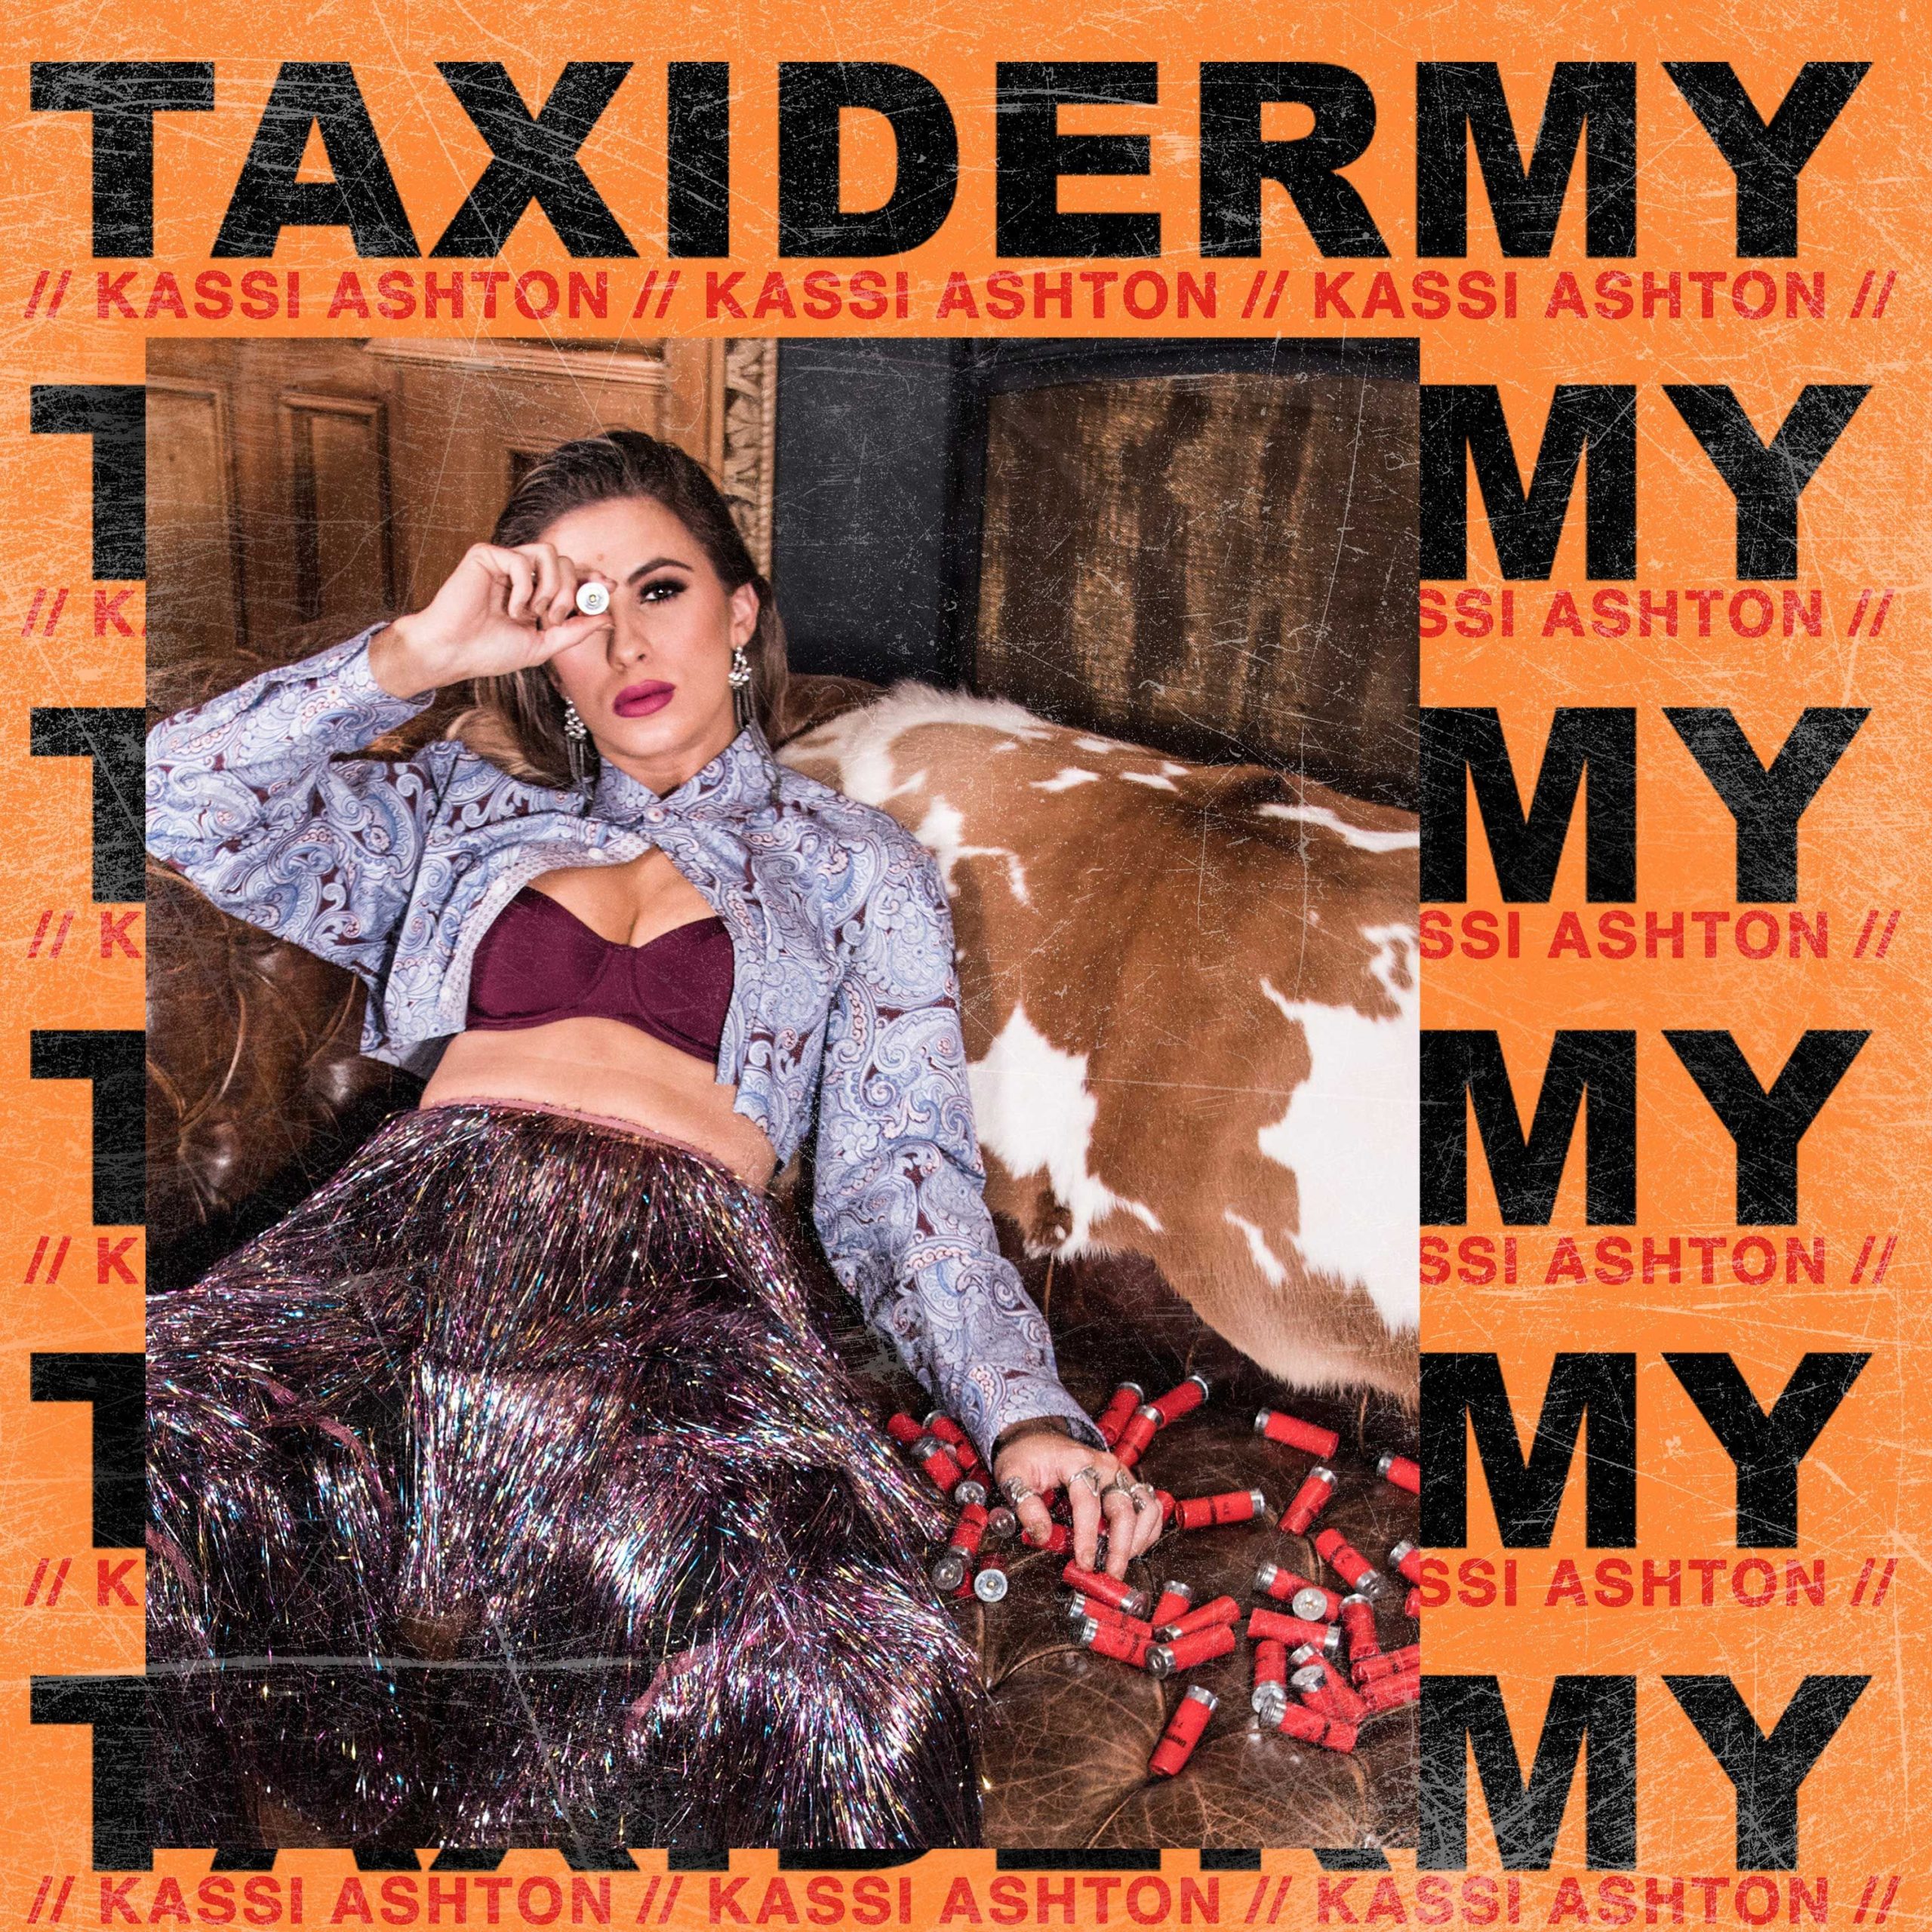 KASSI ASHTON RELEASES “TAXIDERMY” TODAY